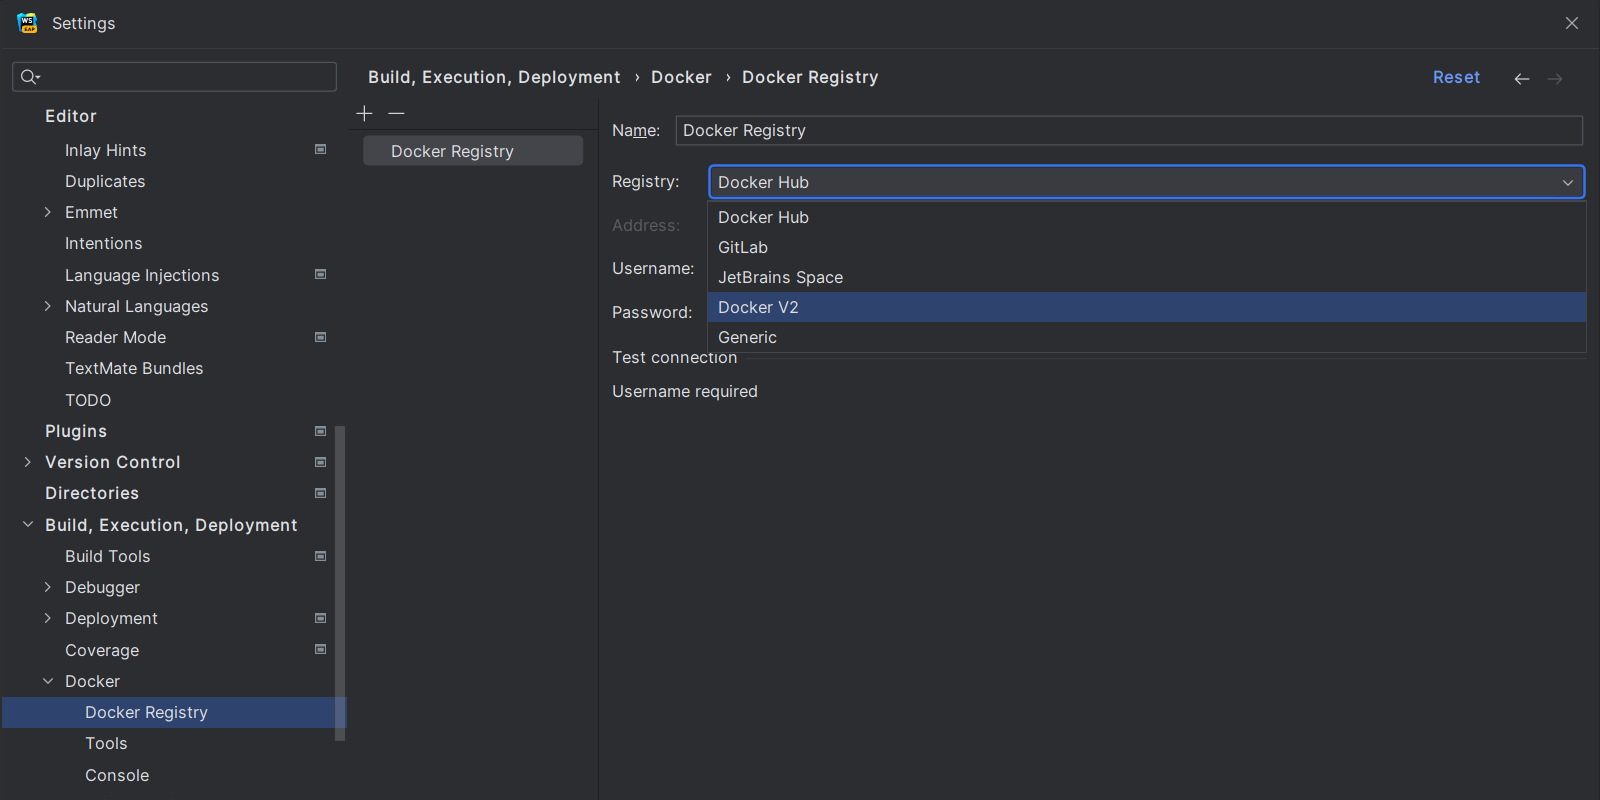 Showing the Docker V2 option available in the Registry input field